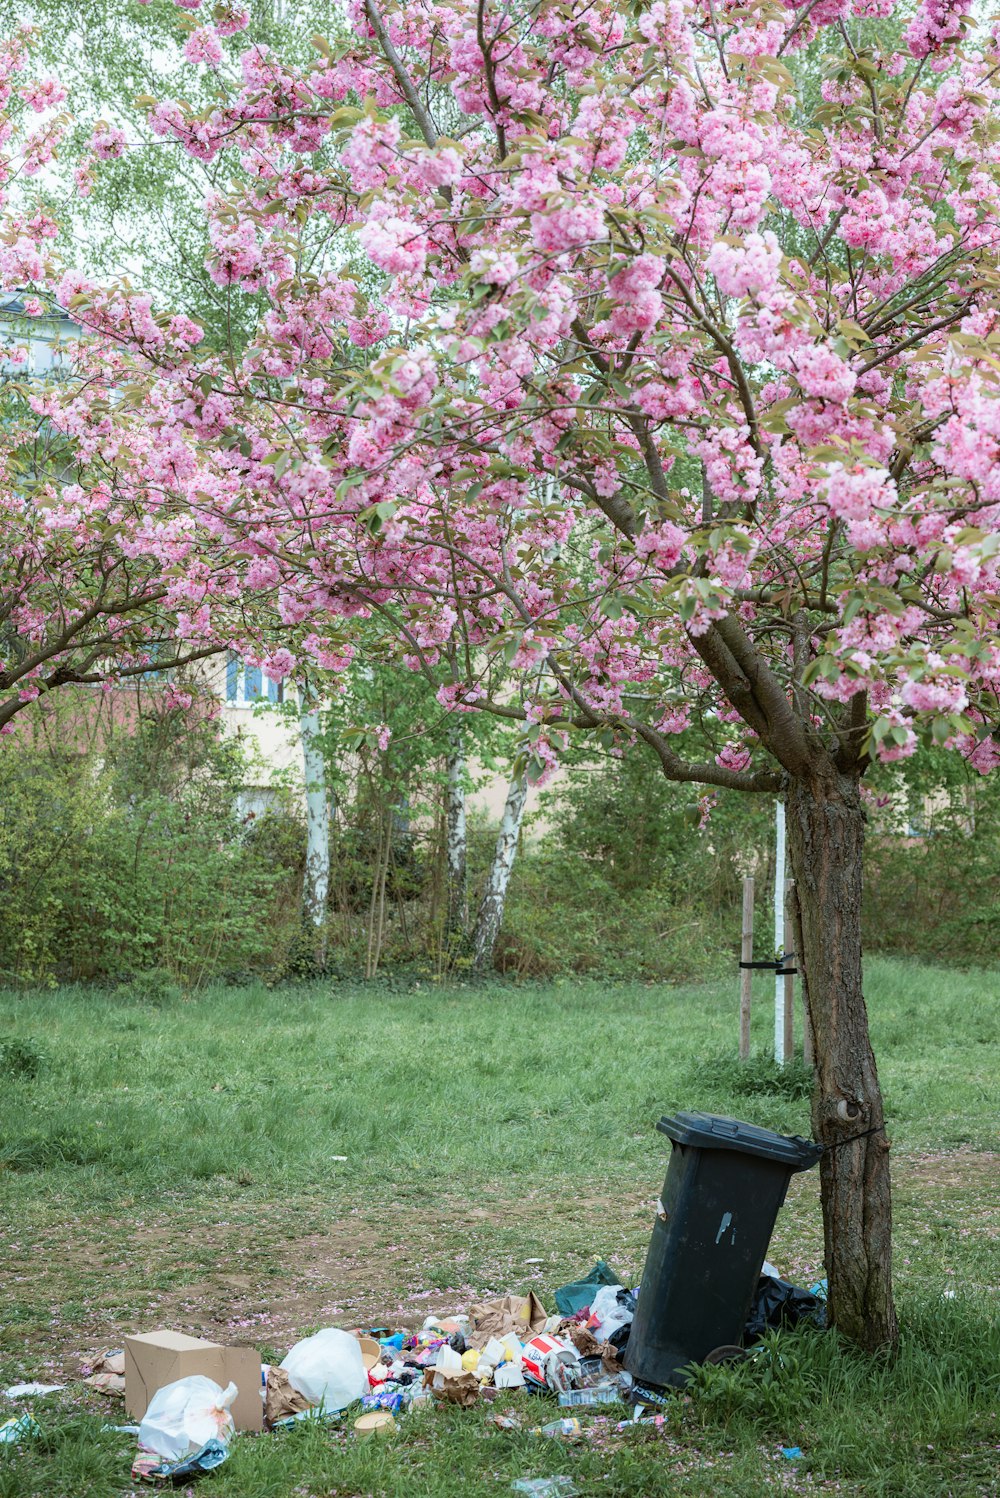 a trash can is next to a tree with pink flowers